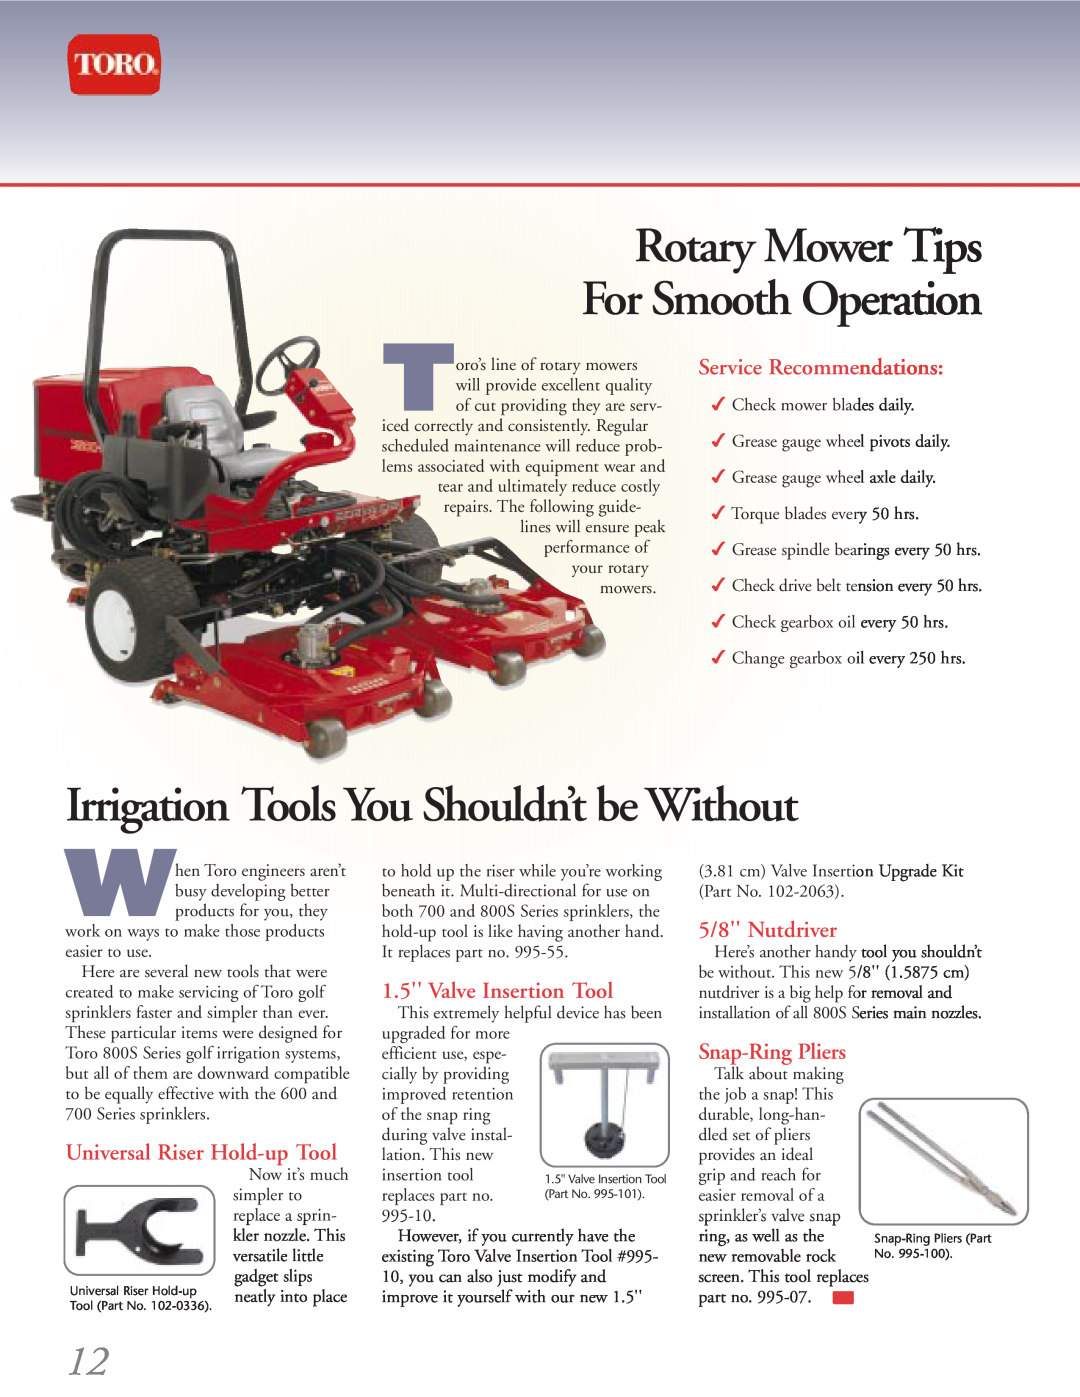 Toro 4500-D manual Irrigation Tools You Shouldn’t be Without, Service Recommendations, Valve Insertion Tool, 5/8 Nutdriver 